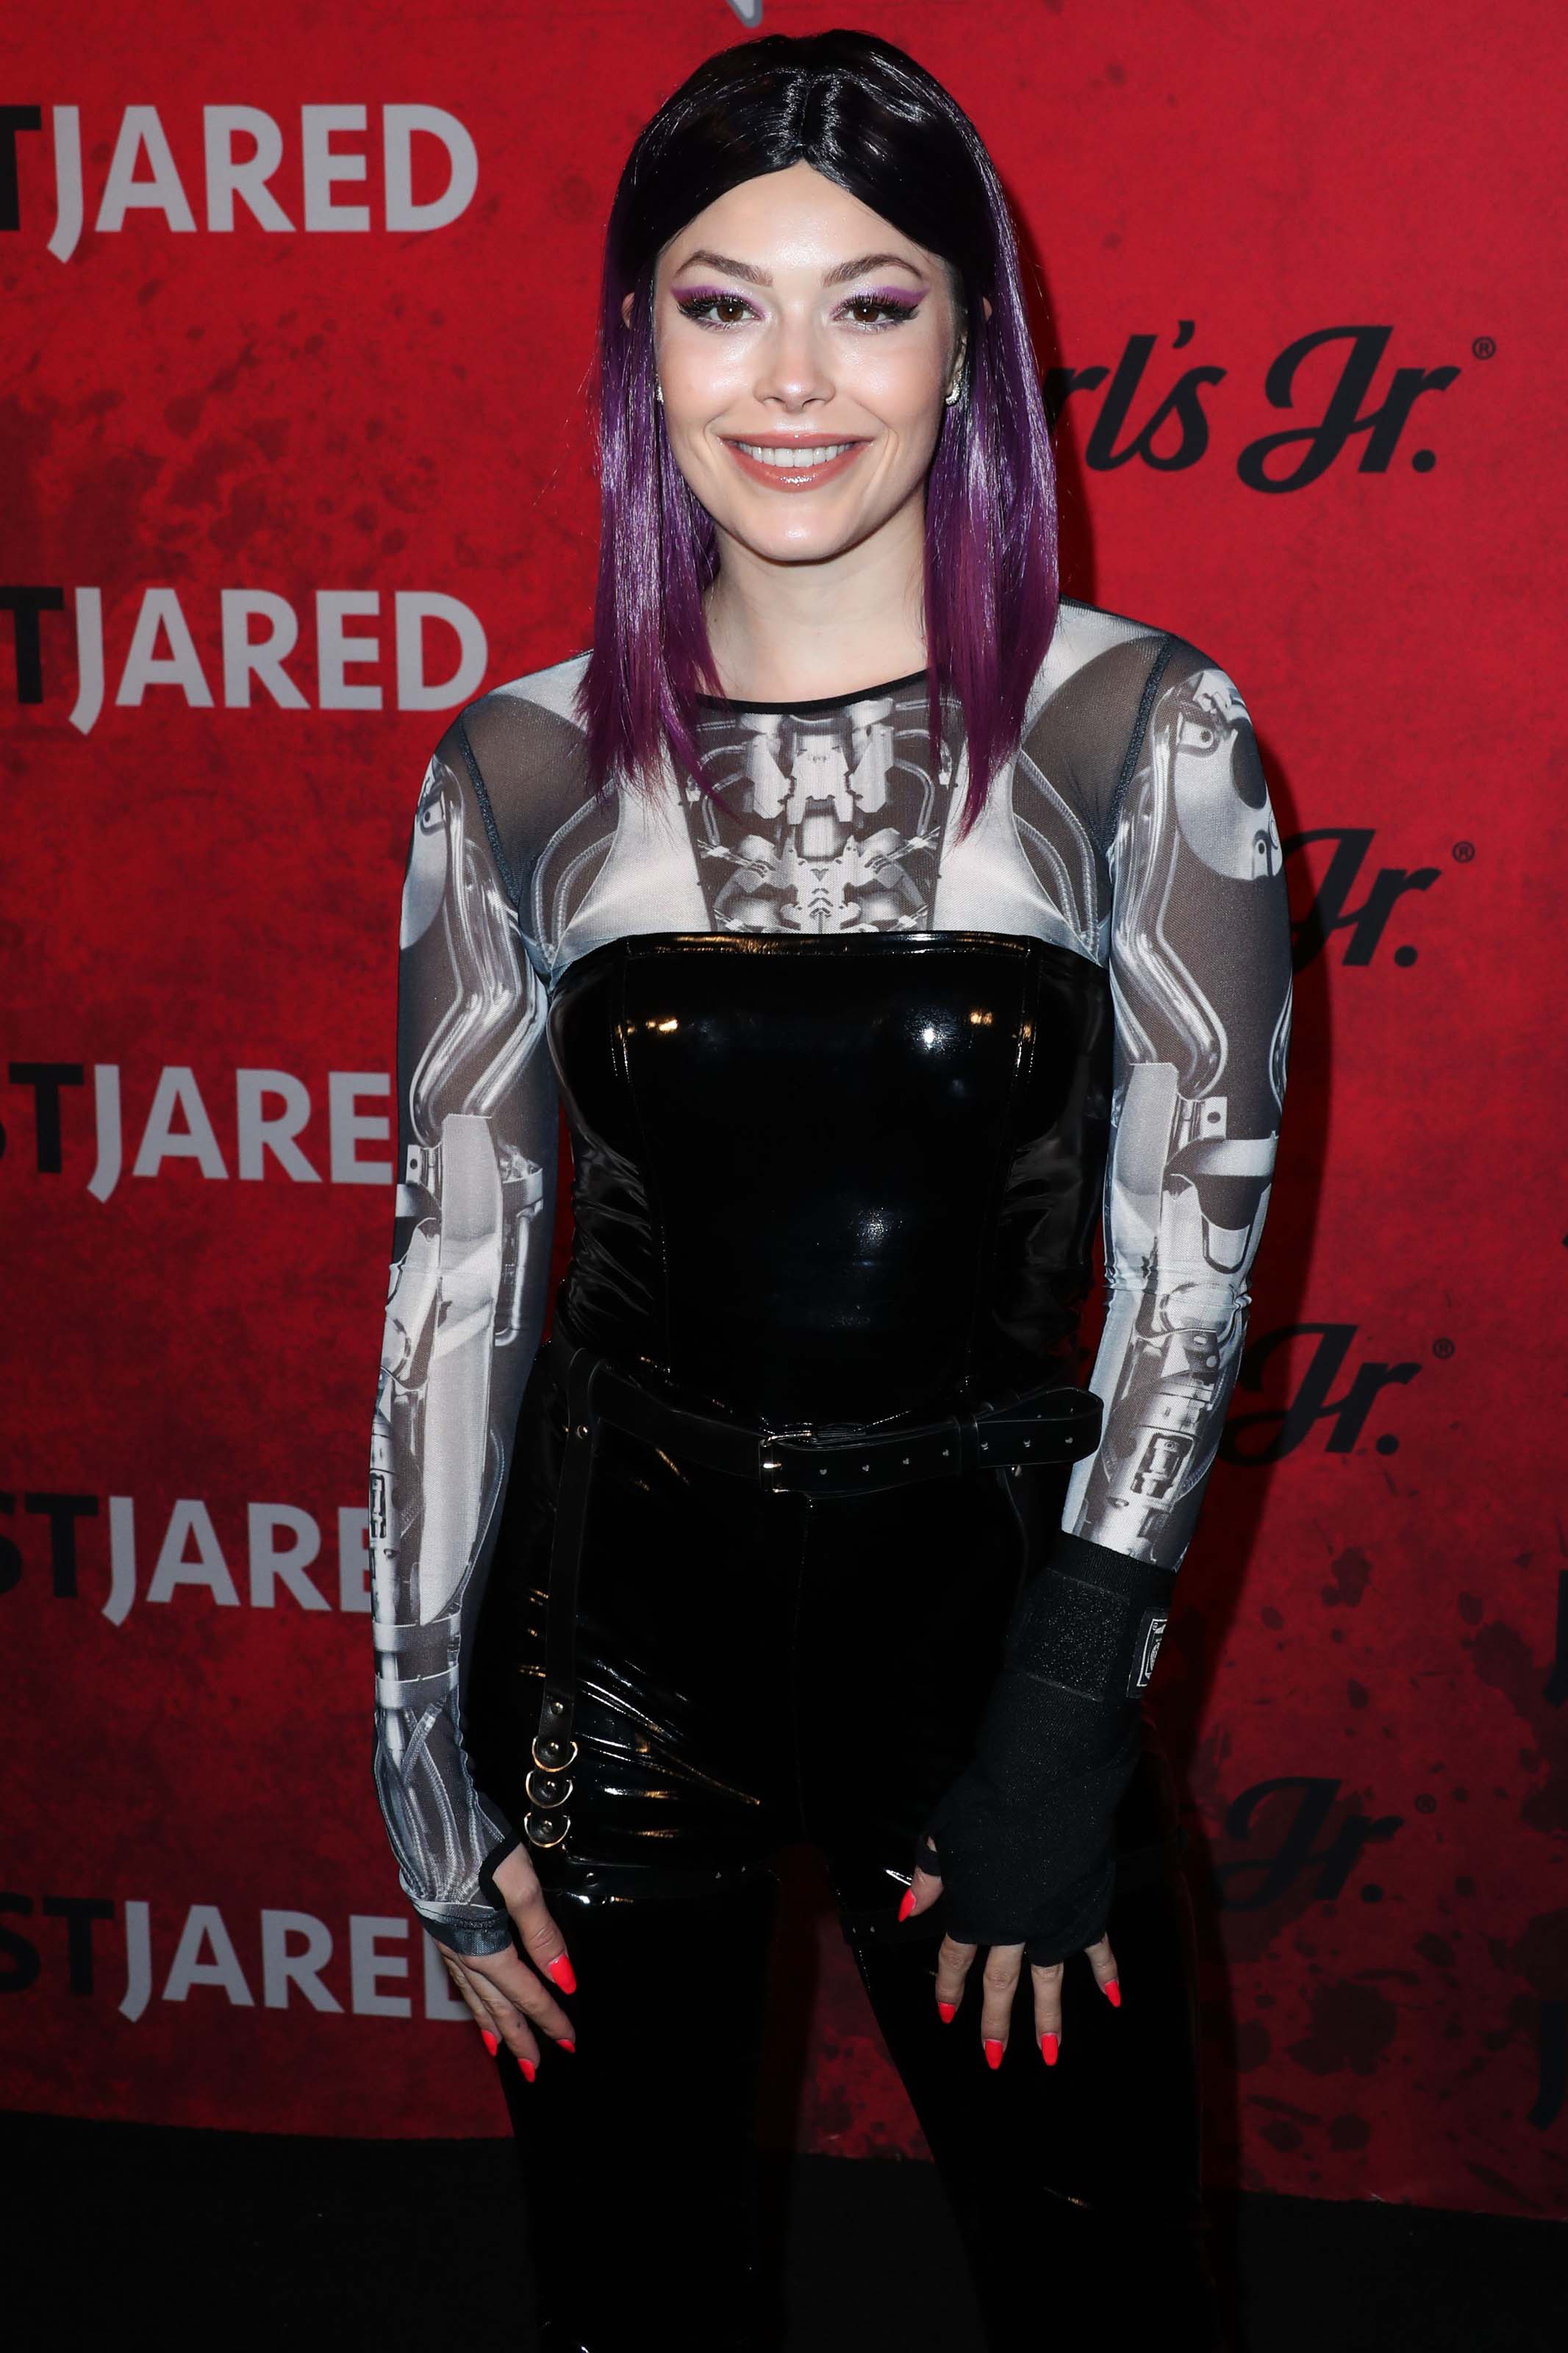 Kristina Kane attends Just Jared’s 7th Annual Halloween Party